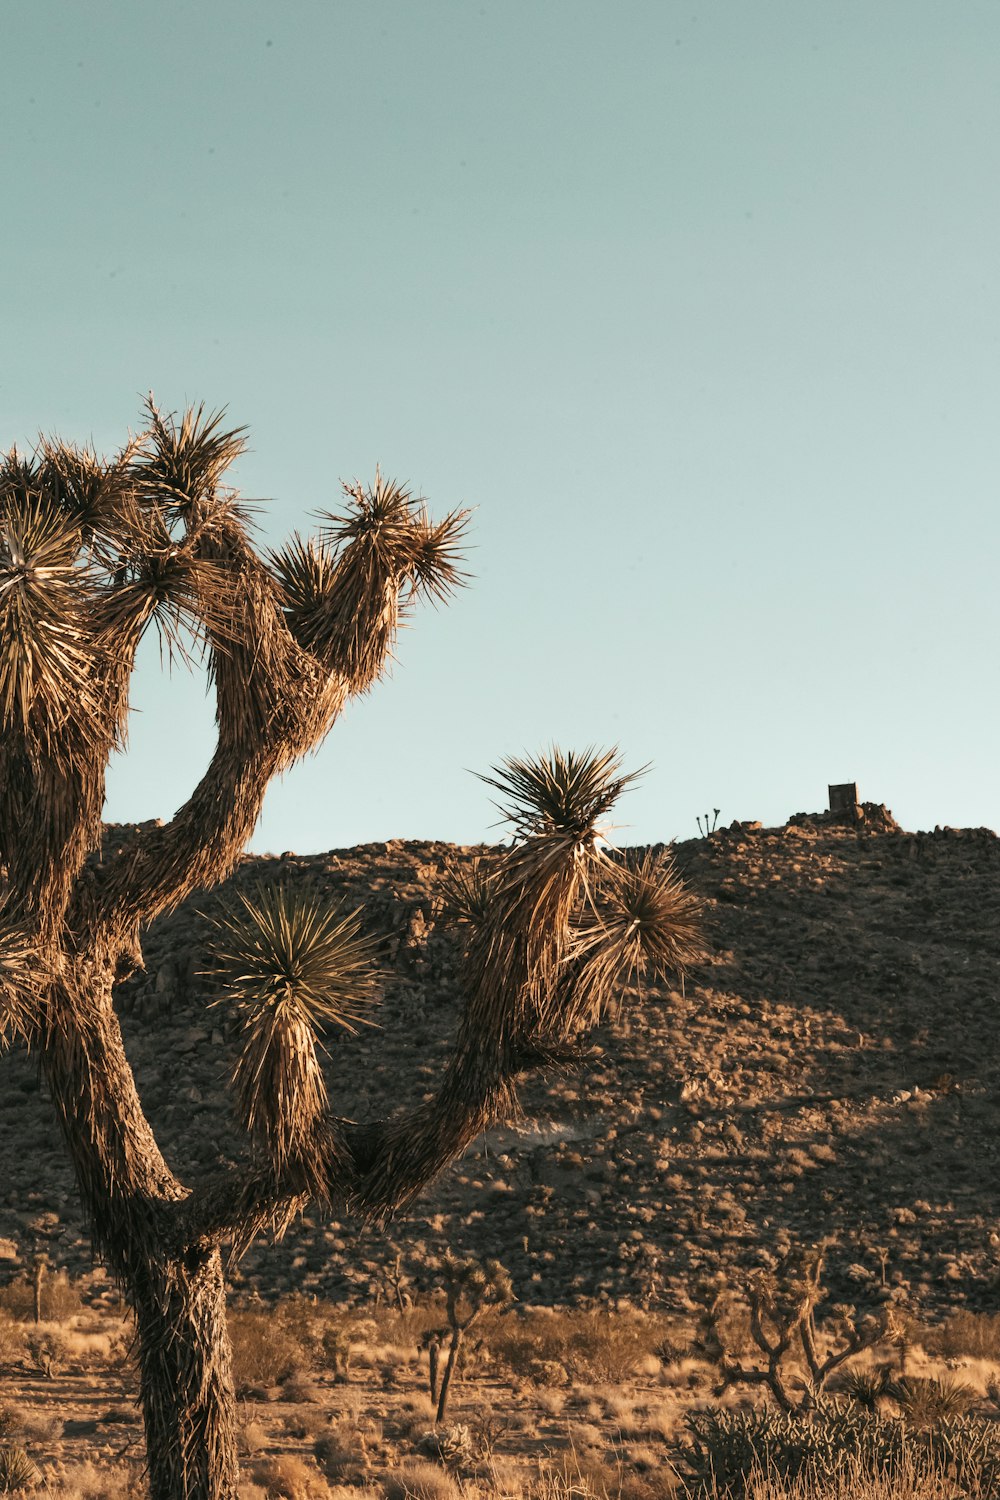 a large cactus tree in the middle of a desert